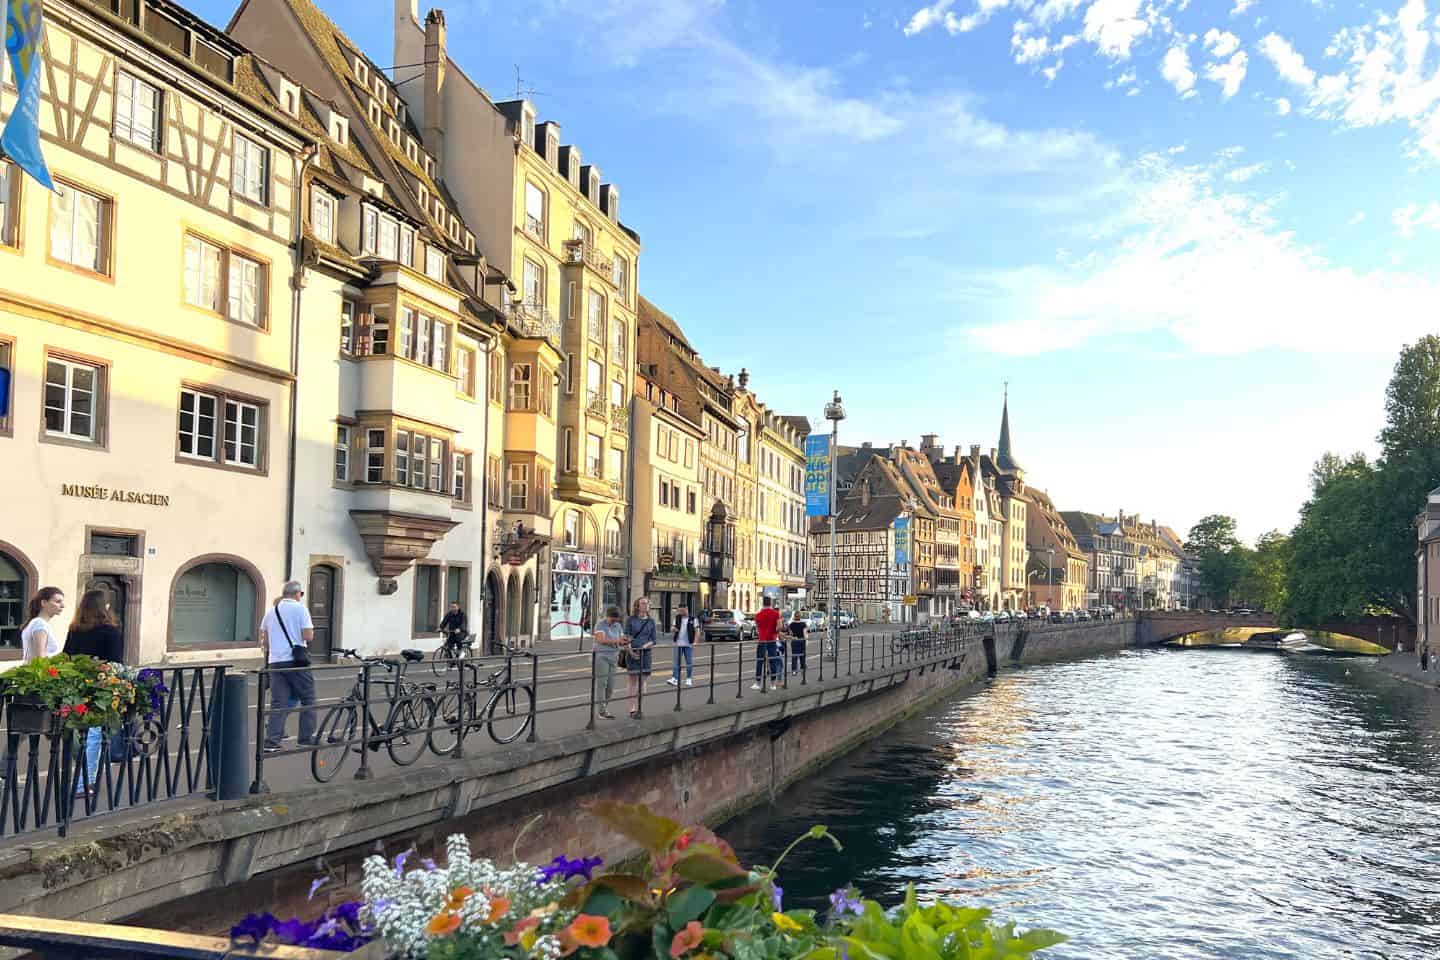 Colorful buildings lining a canal in Strasbourg